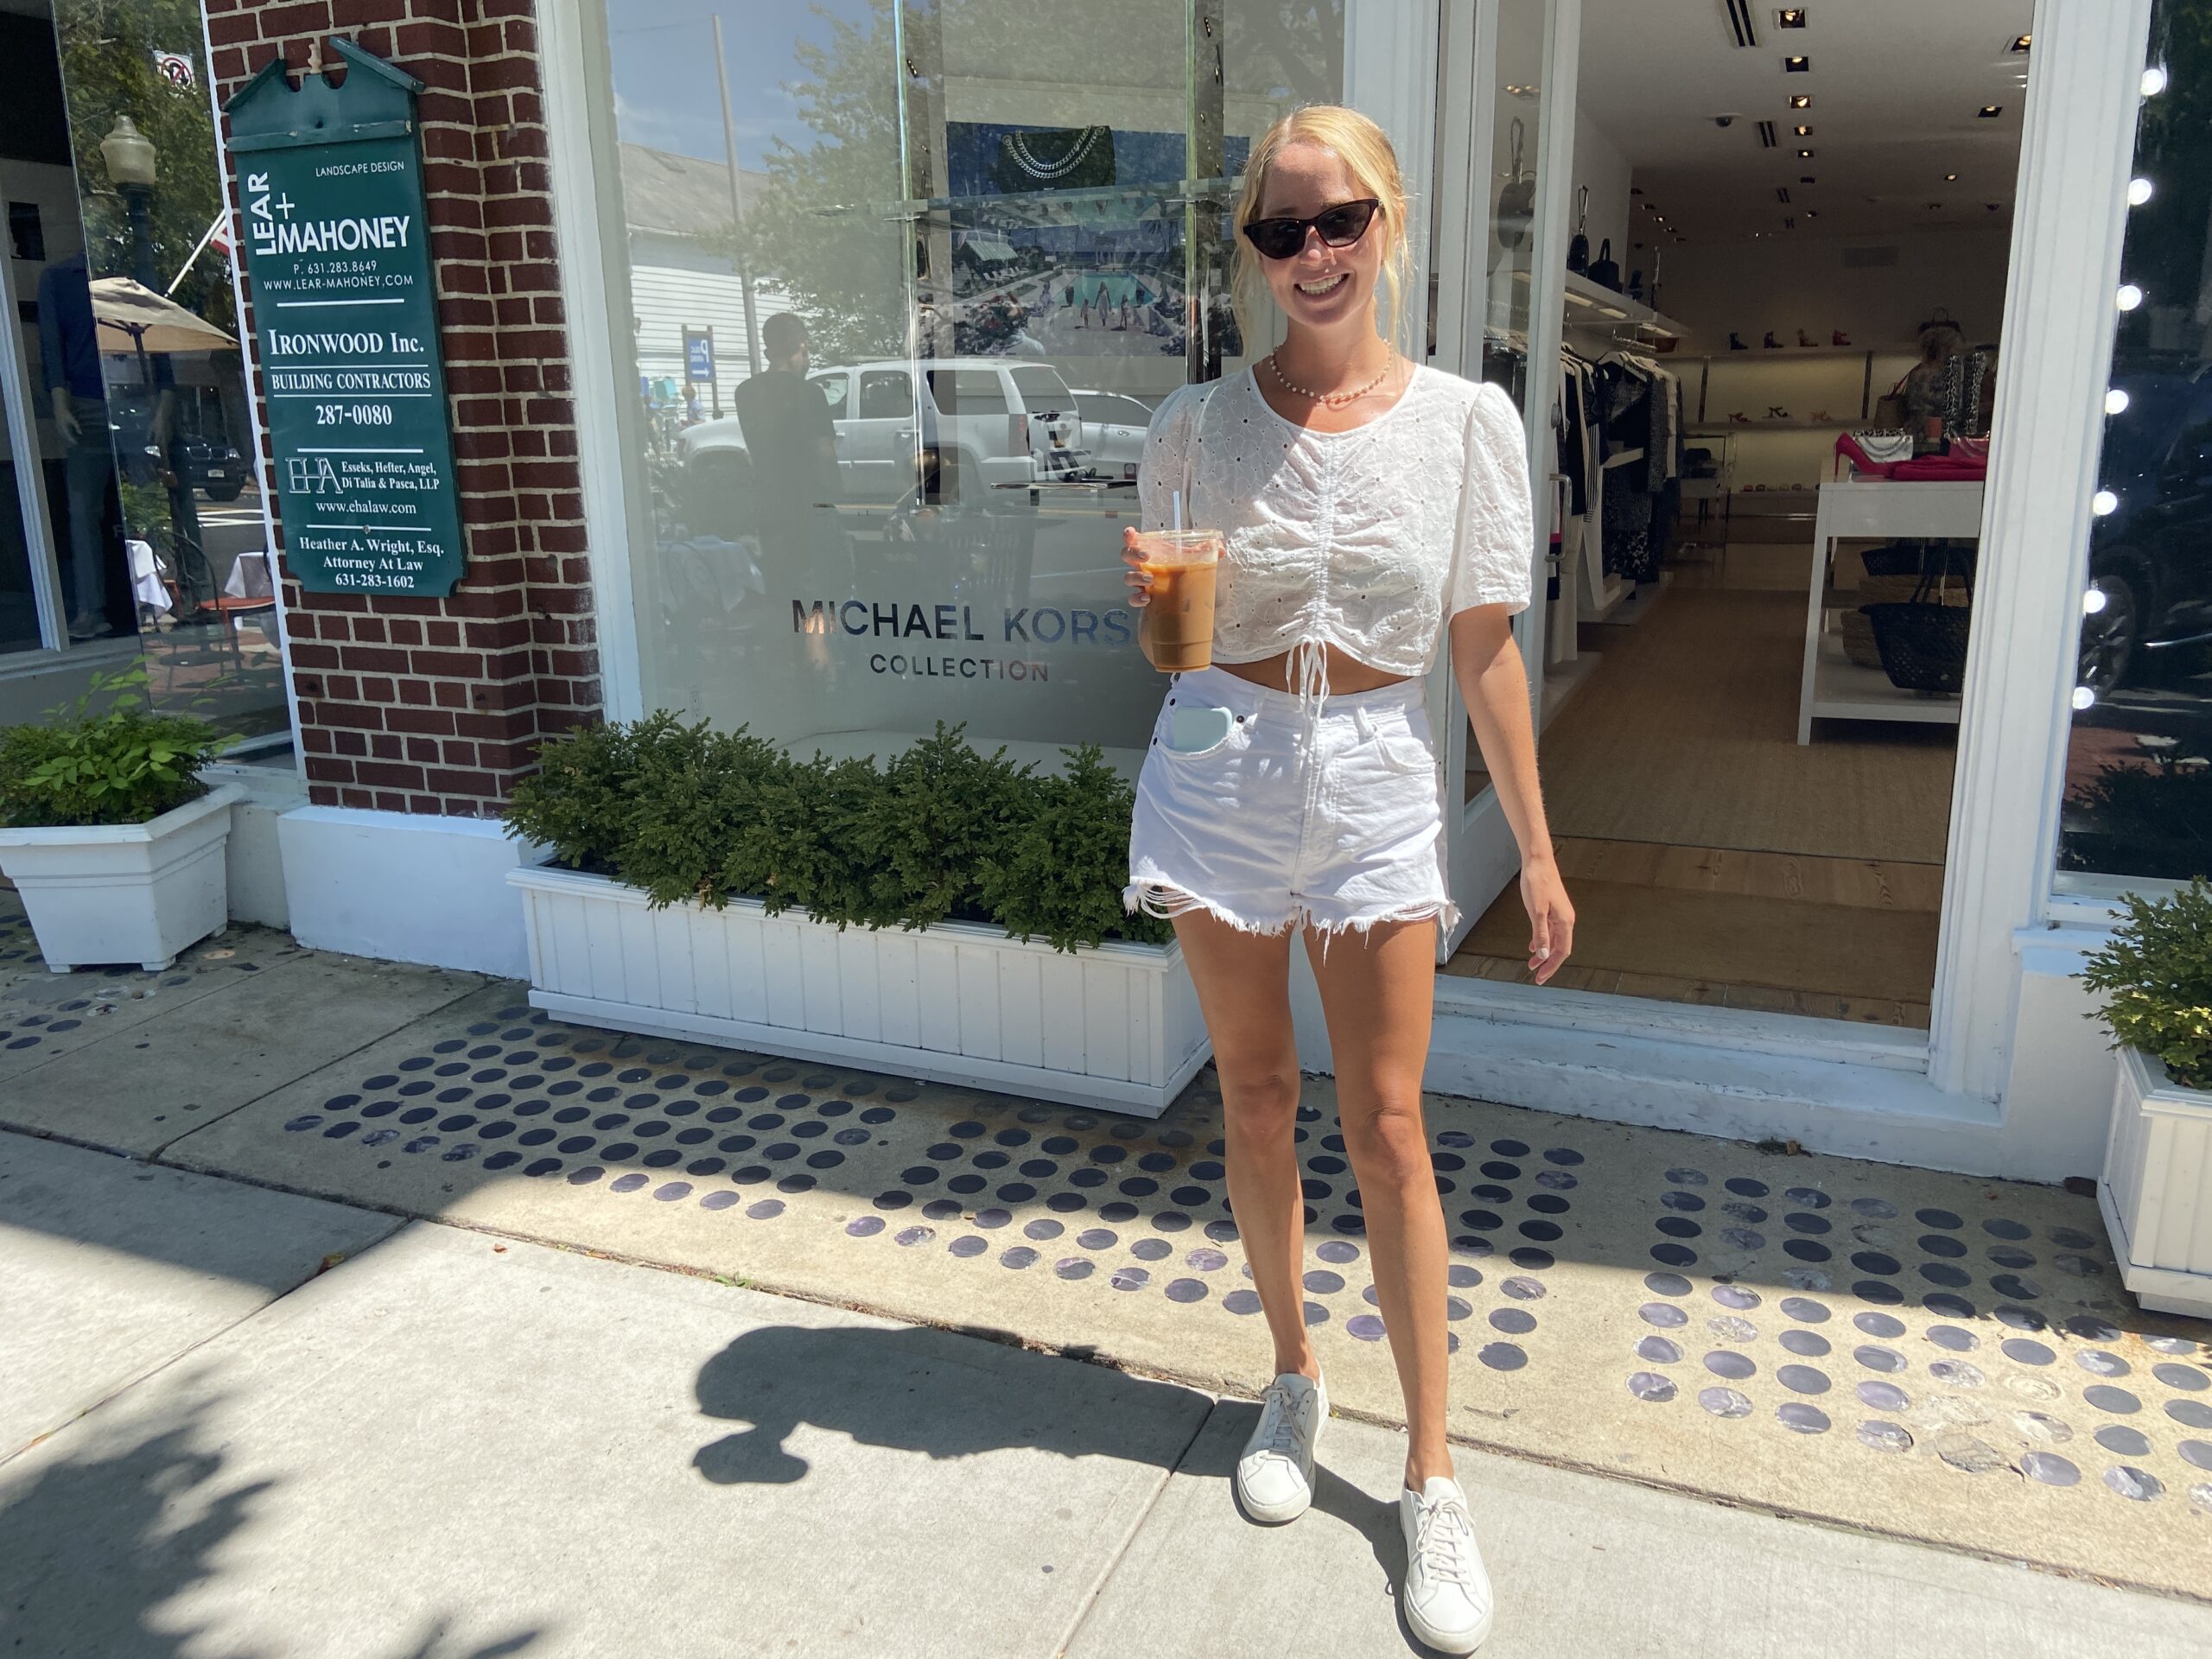 Ali Chilton donned an all white look while enjoying a coffee at St. Ambroeous in Southampton. JULIA HEMING